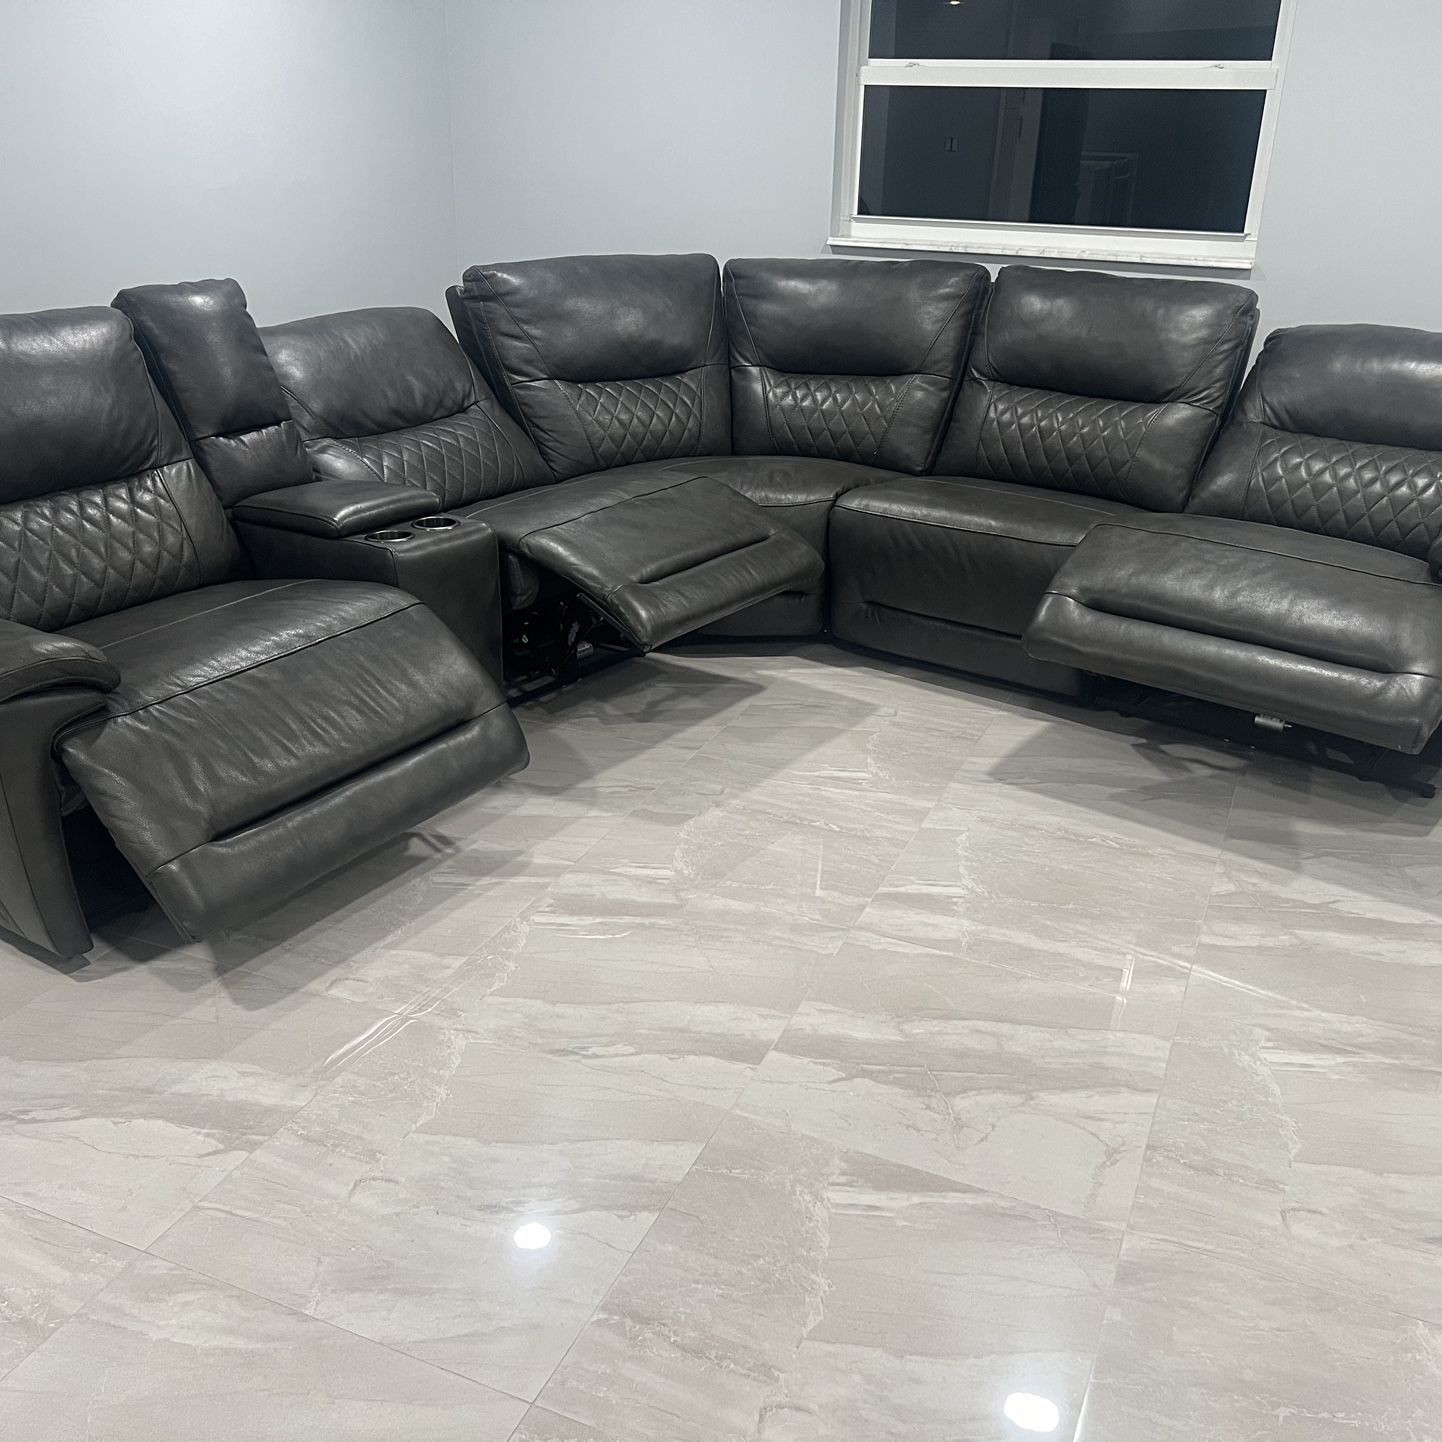 FOR SALE !!!$1,500 Dark Grey Sectional Perfect Condition!Barely Used,kid Free,Smoke Free Home..